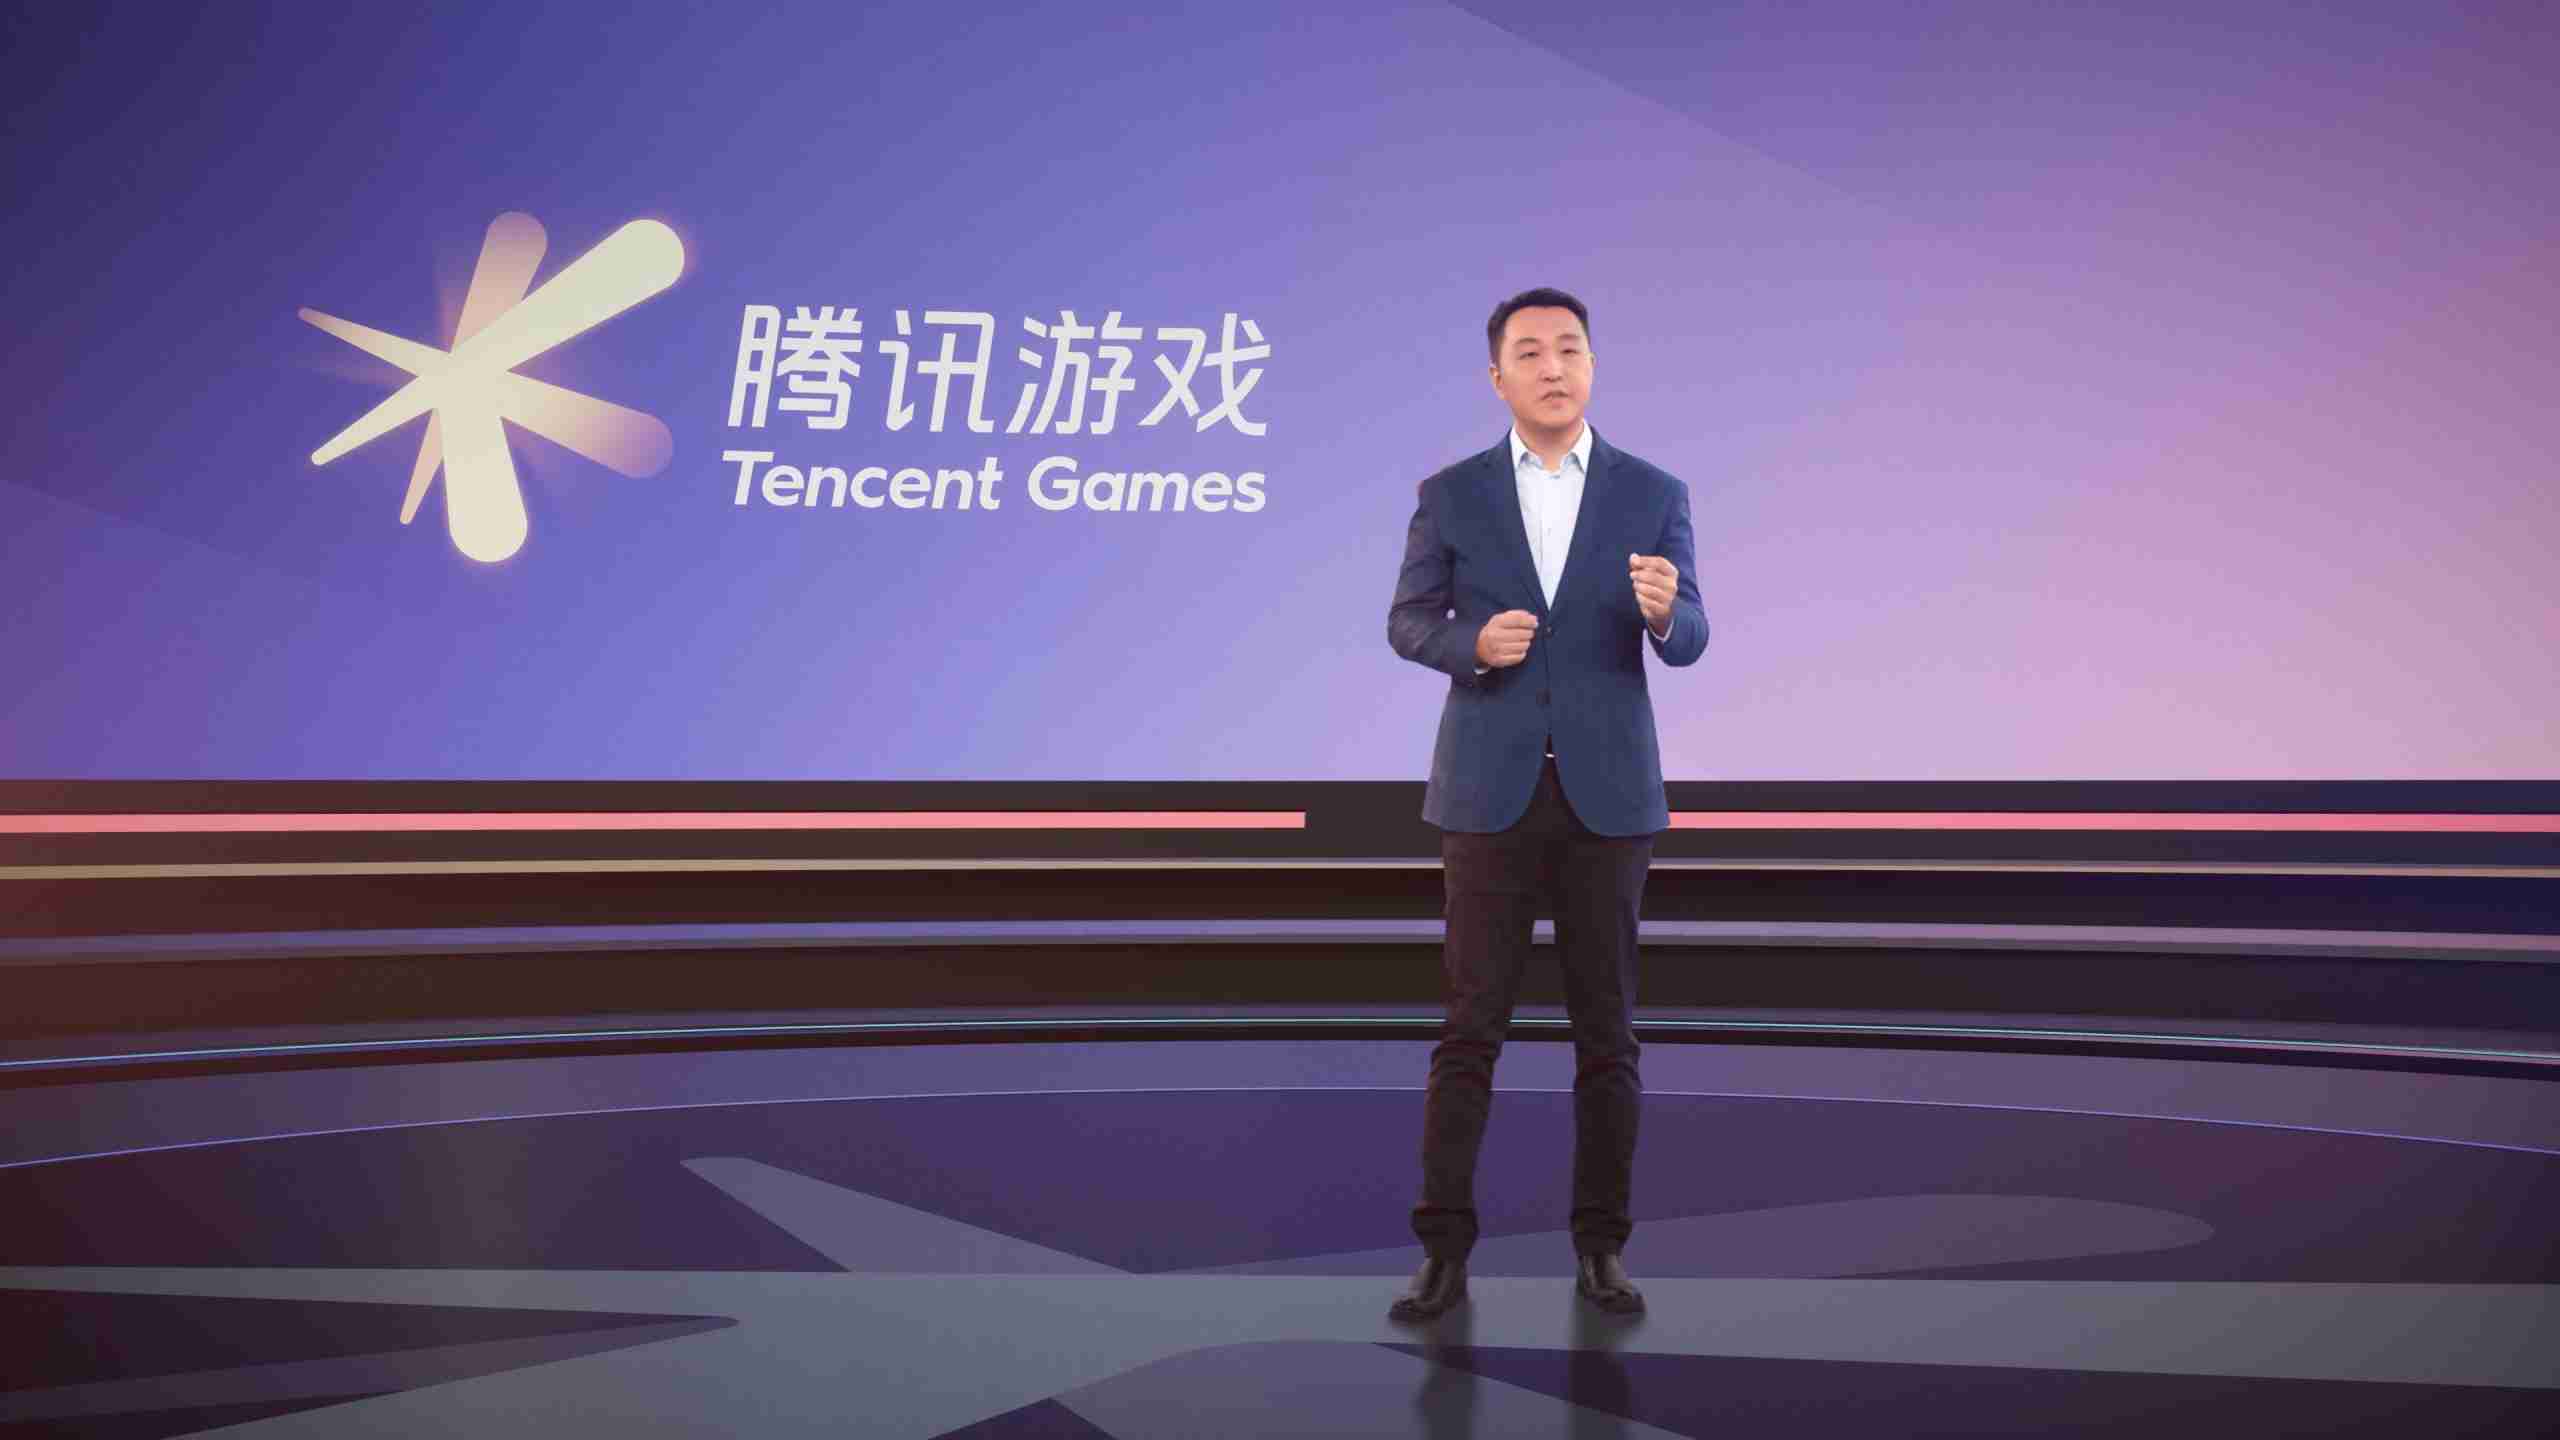 Tencent Games & The MetaVerse